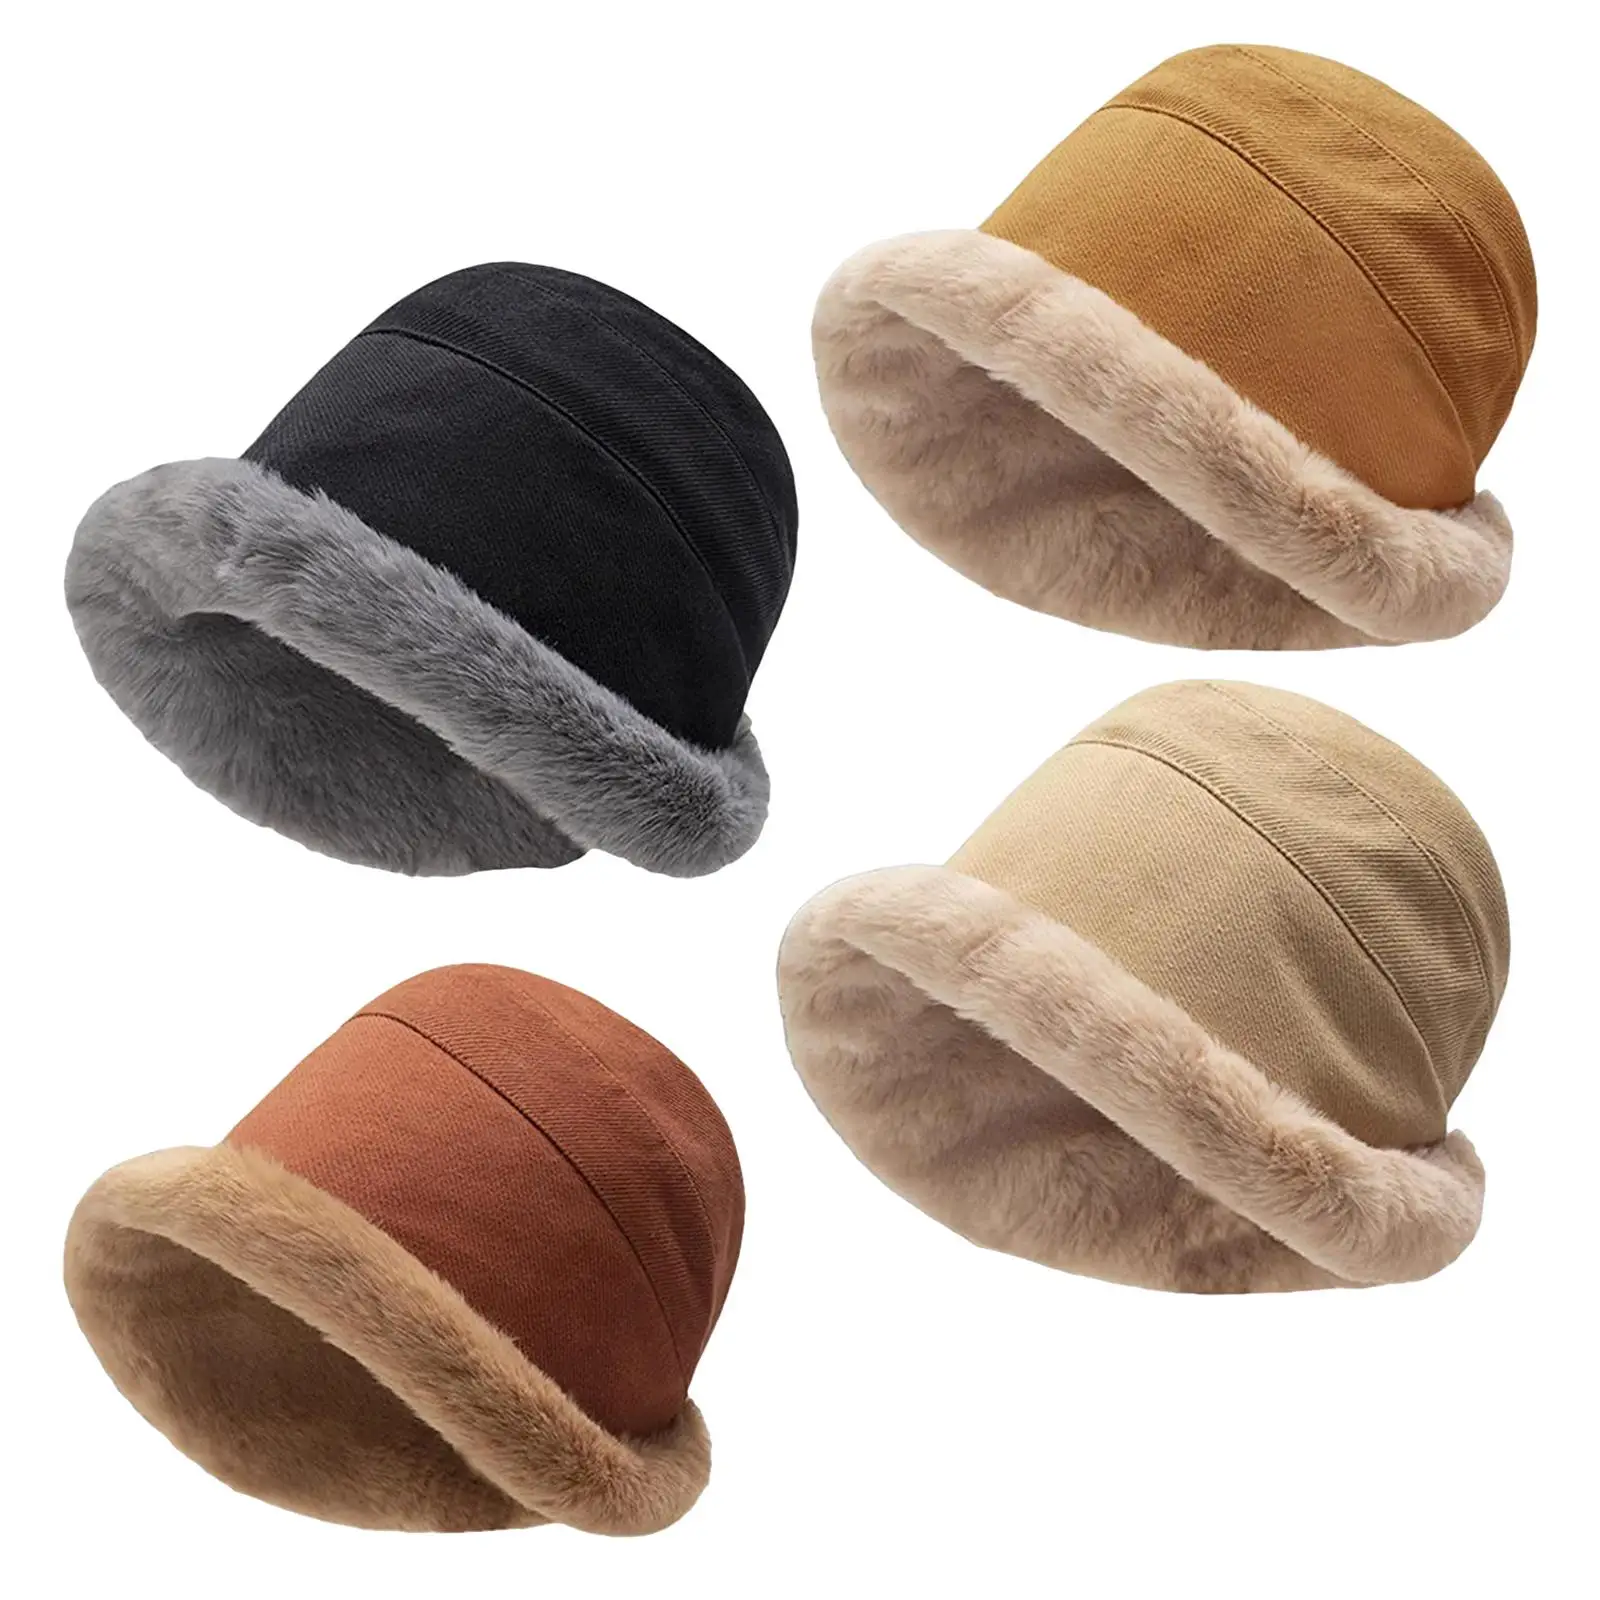 Winter Bucket Hat for Women Soft Thicken Plush Warm Casual Comfortable for Hiking Travel Outdoor Cold Weather Ladies